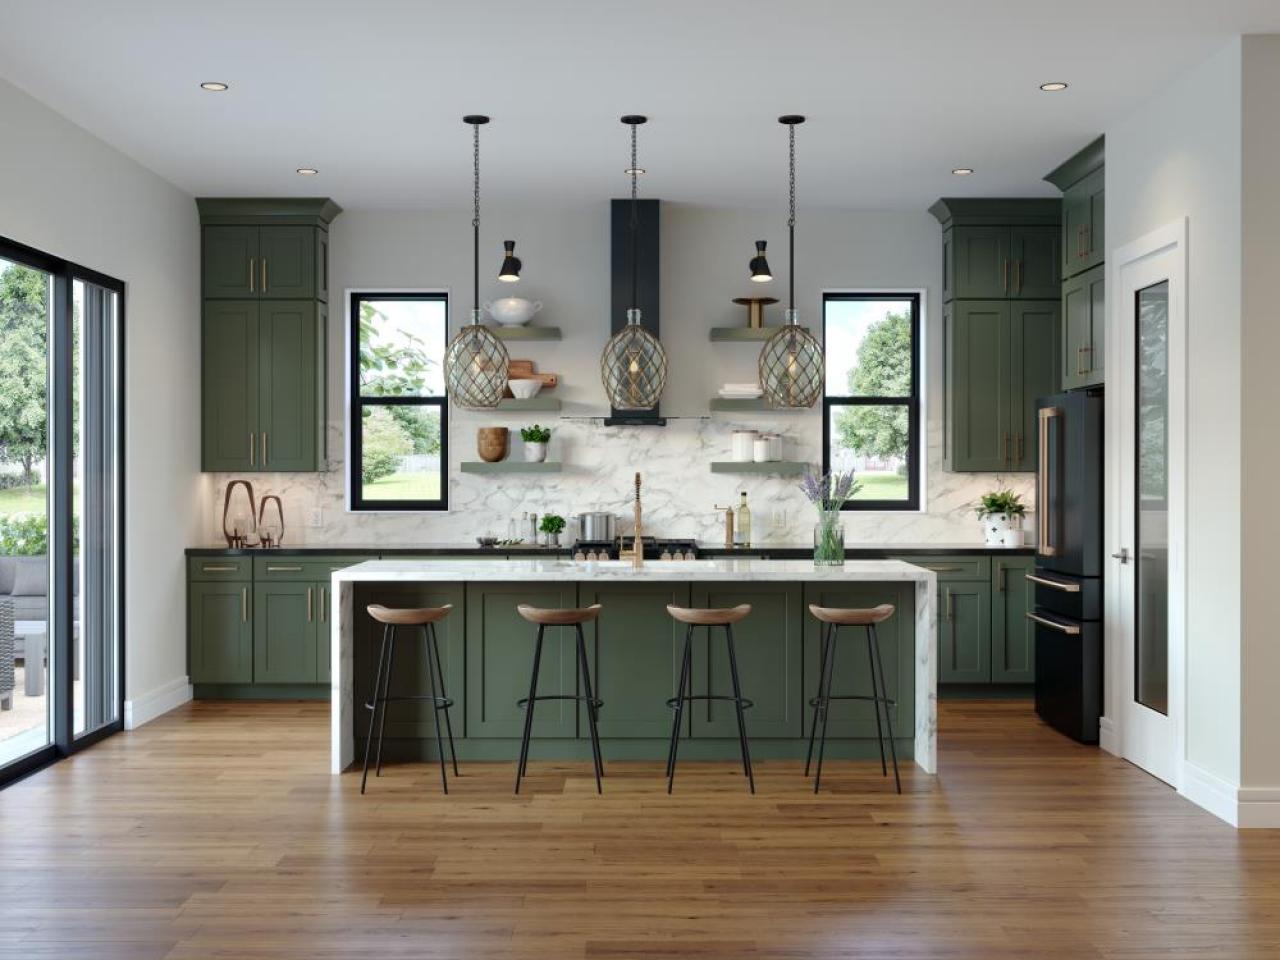 https://hgtvhome.sndimg.com/content/dam/images/hgtv/products/2022/2/17/4/rx_lowes_galway-kitchen-cabinetry-collection.jpeg.rend.hgtvcom.1280.960.suffix/1645137678444.jpeg